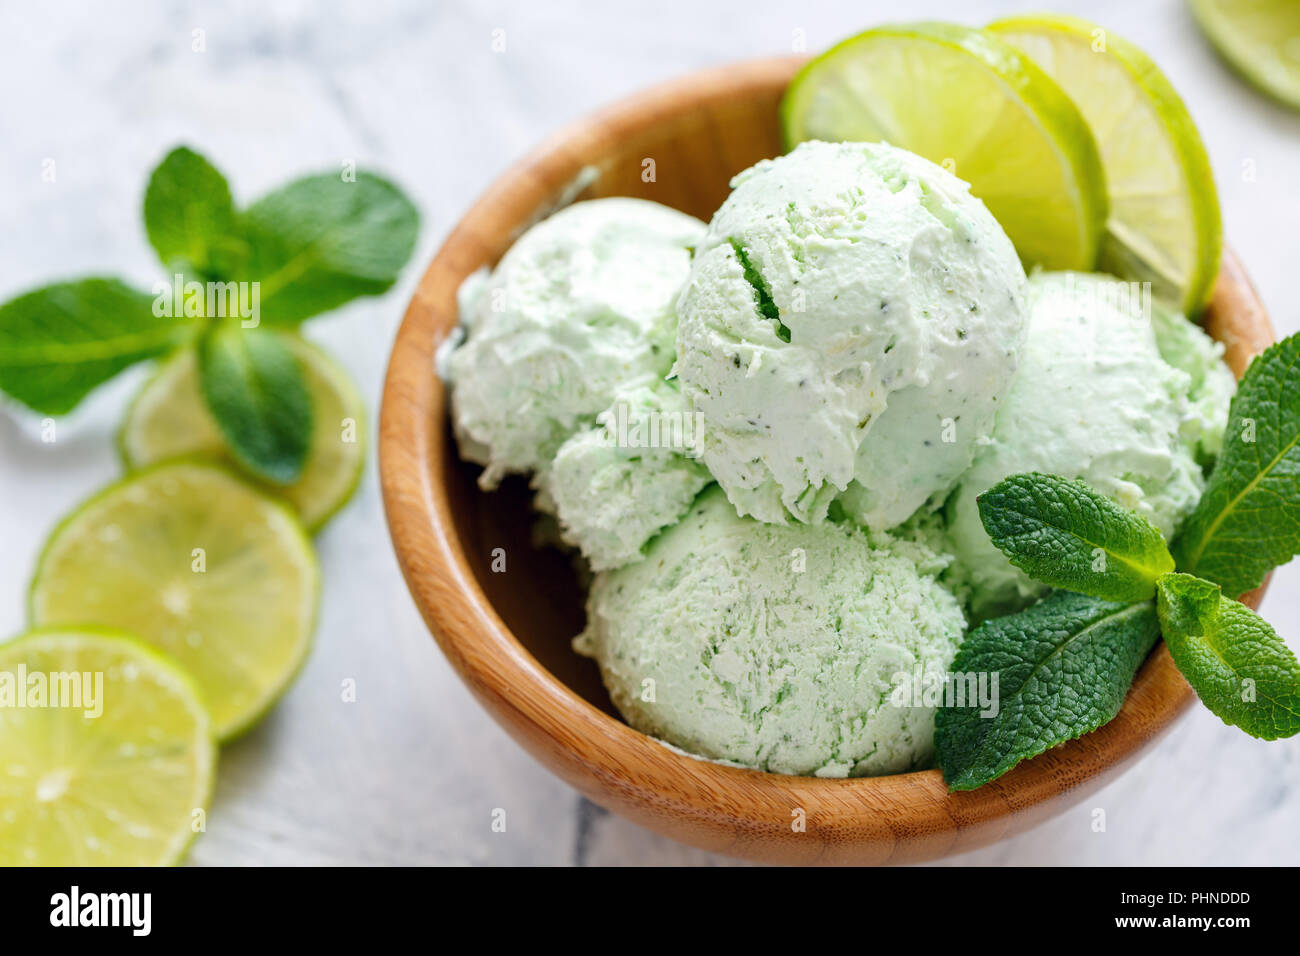 Mojito ice cream with lime slices and mint sprigs. Stock Photo